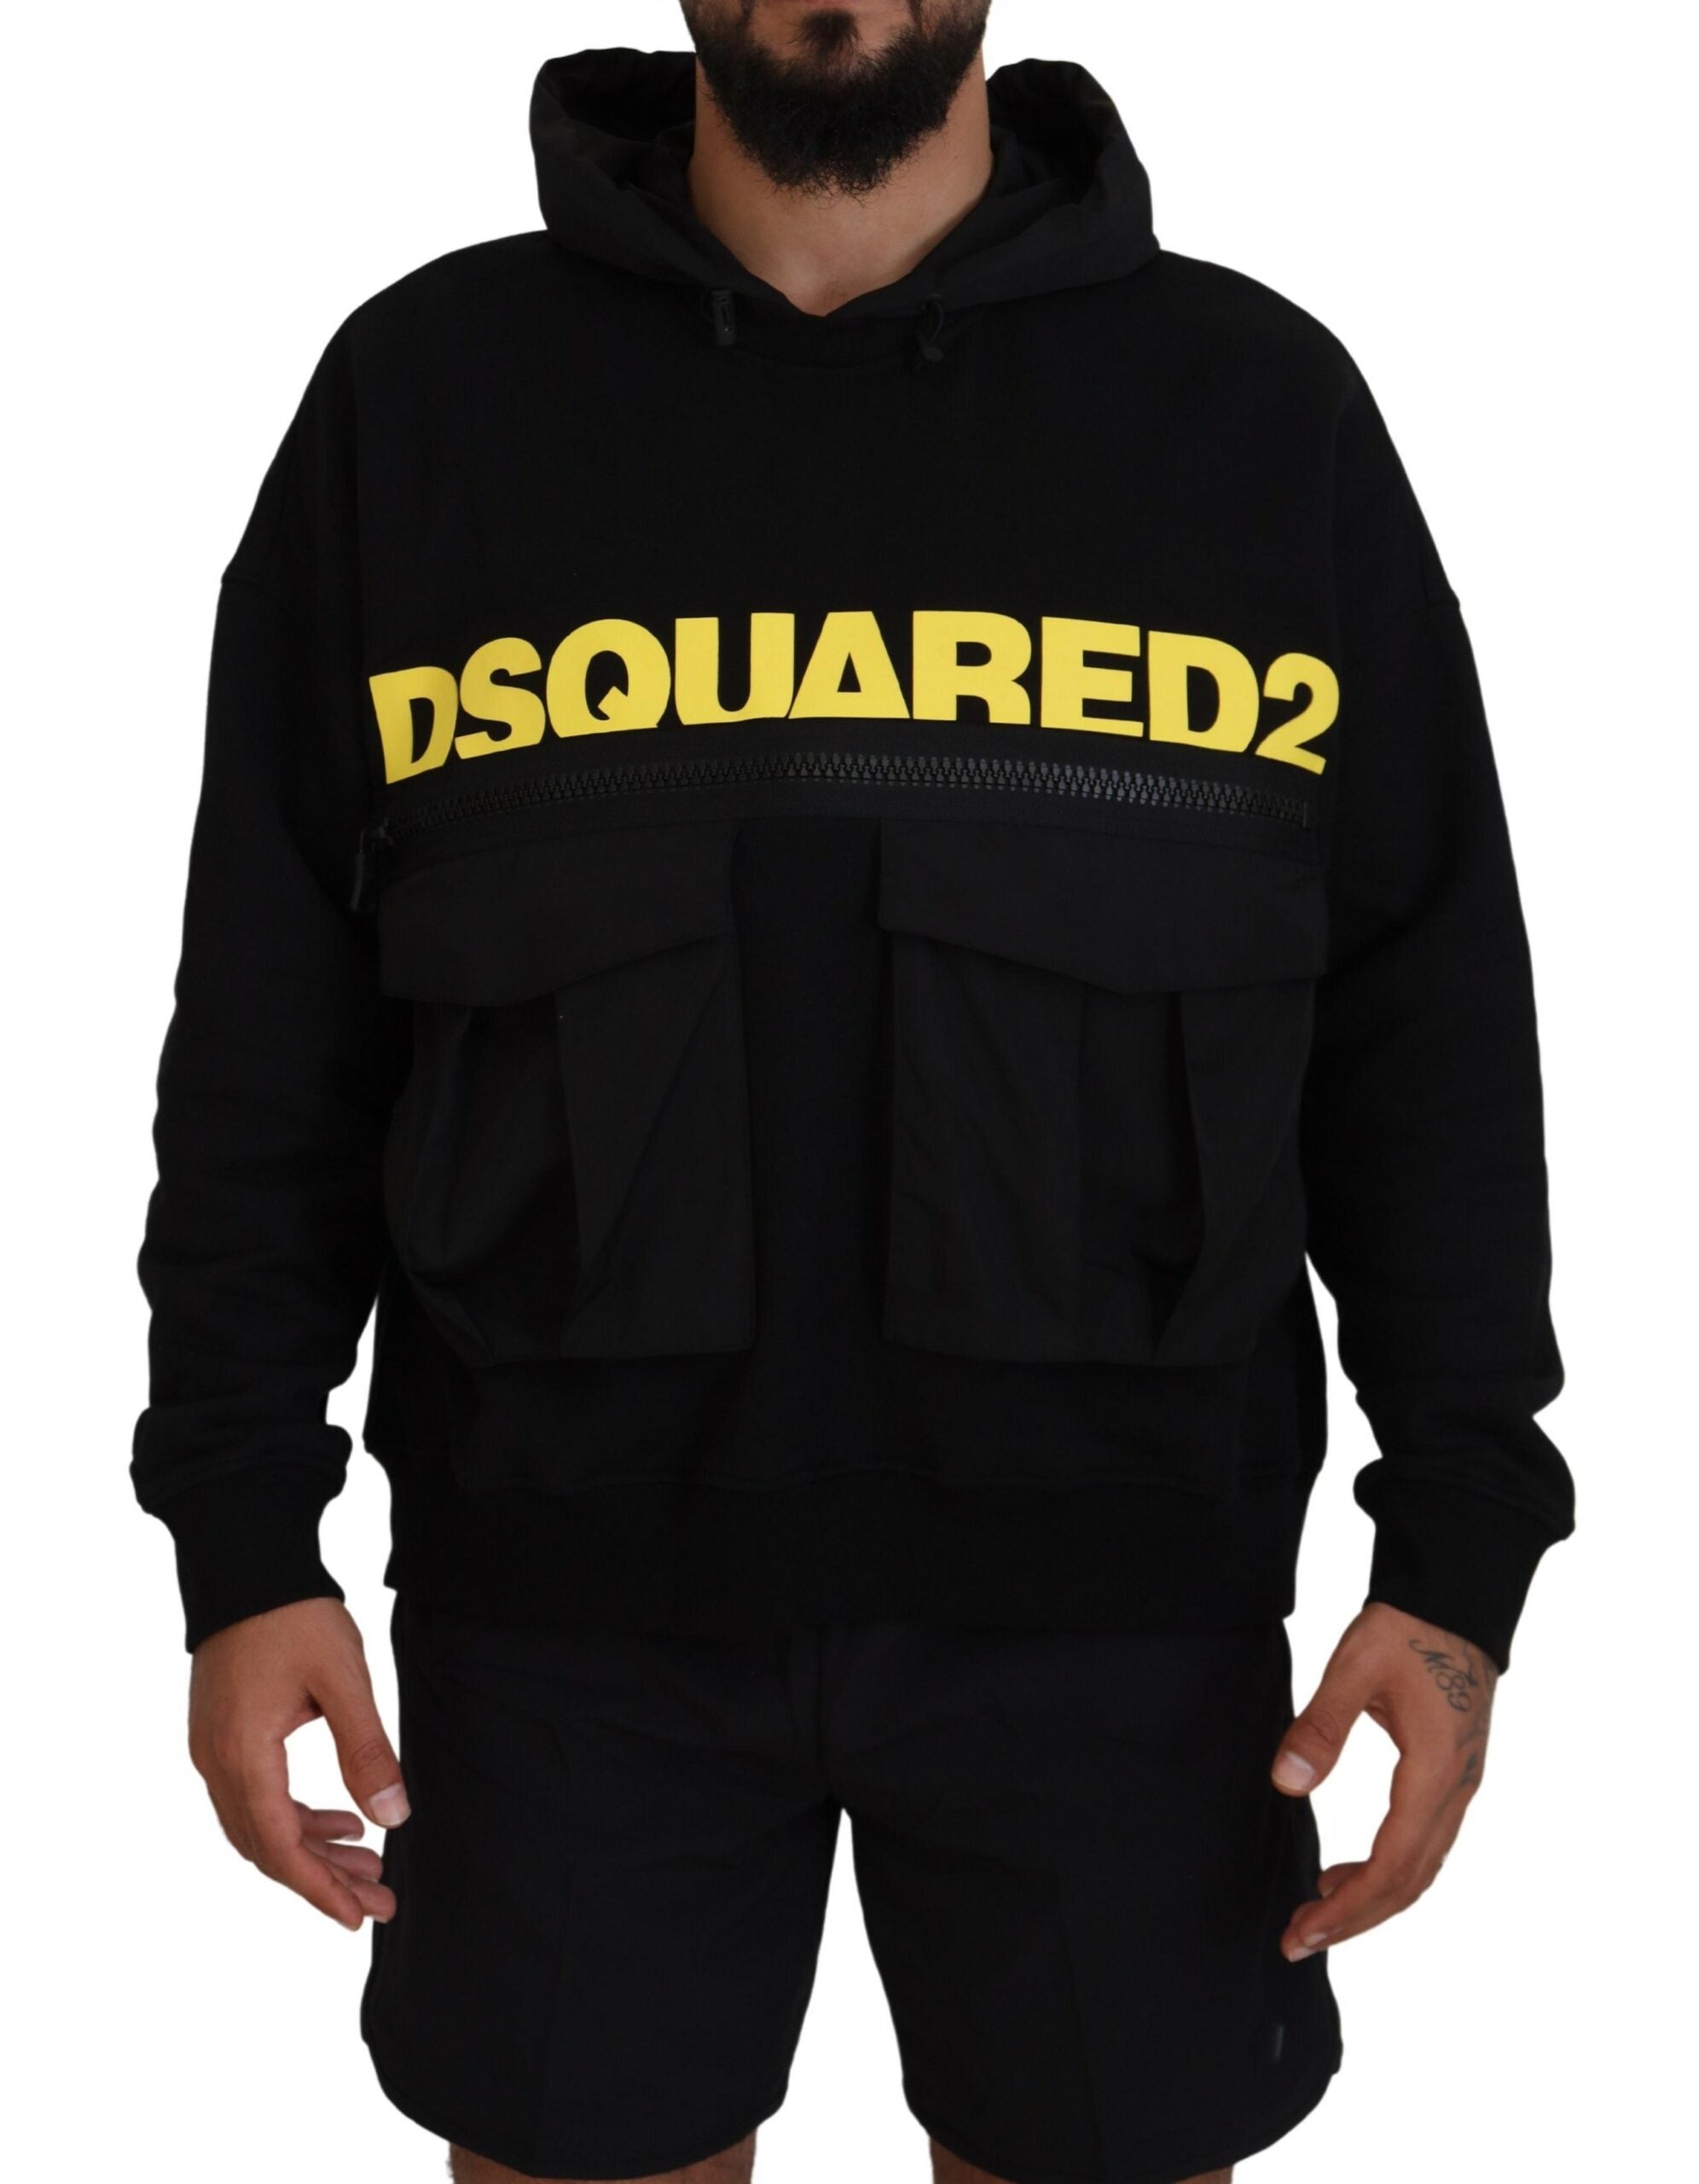 Dsquared² Black Cotton Hooded Printed Pullover Men's Sweater